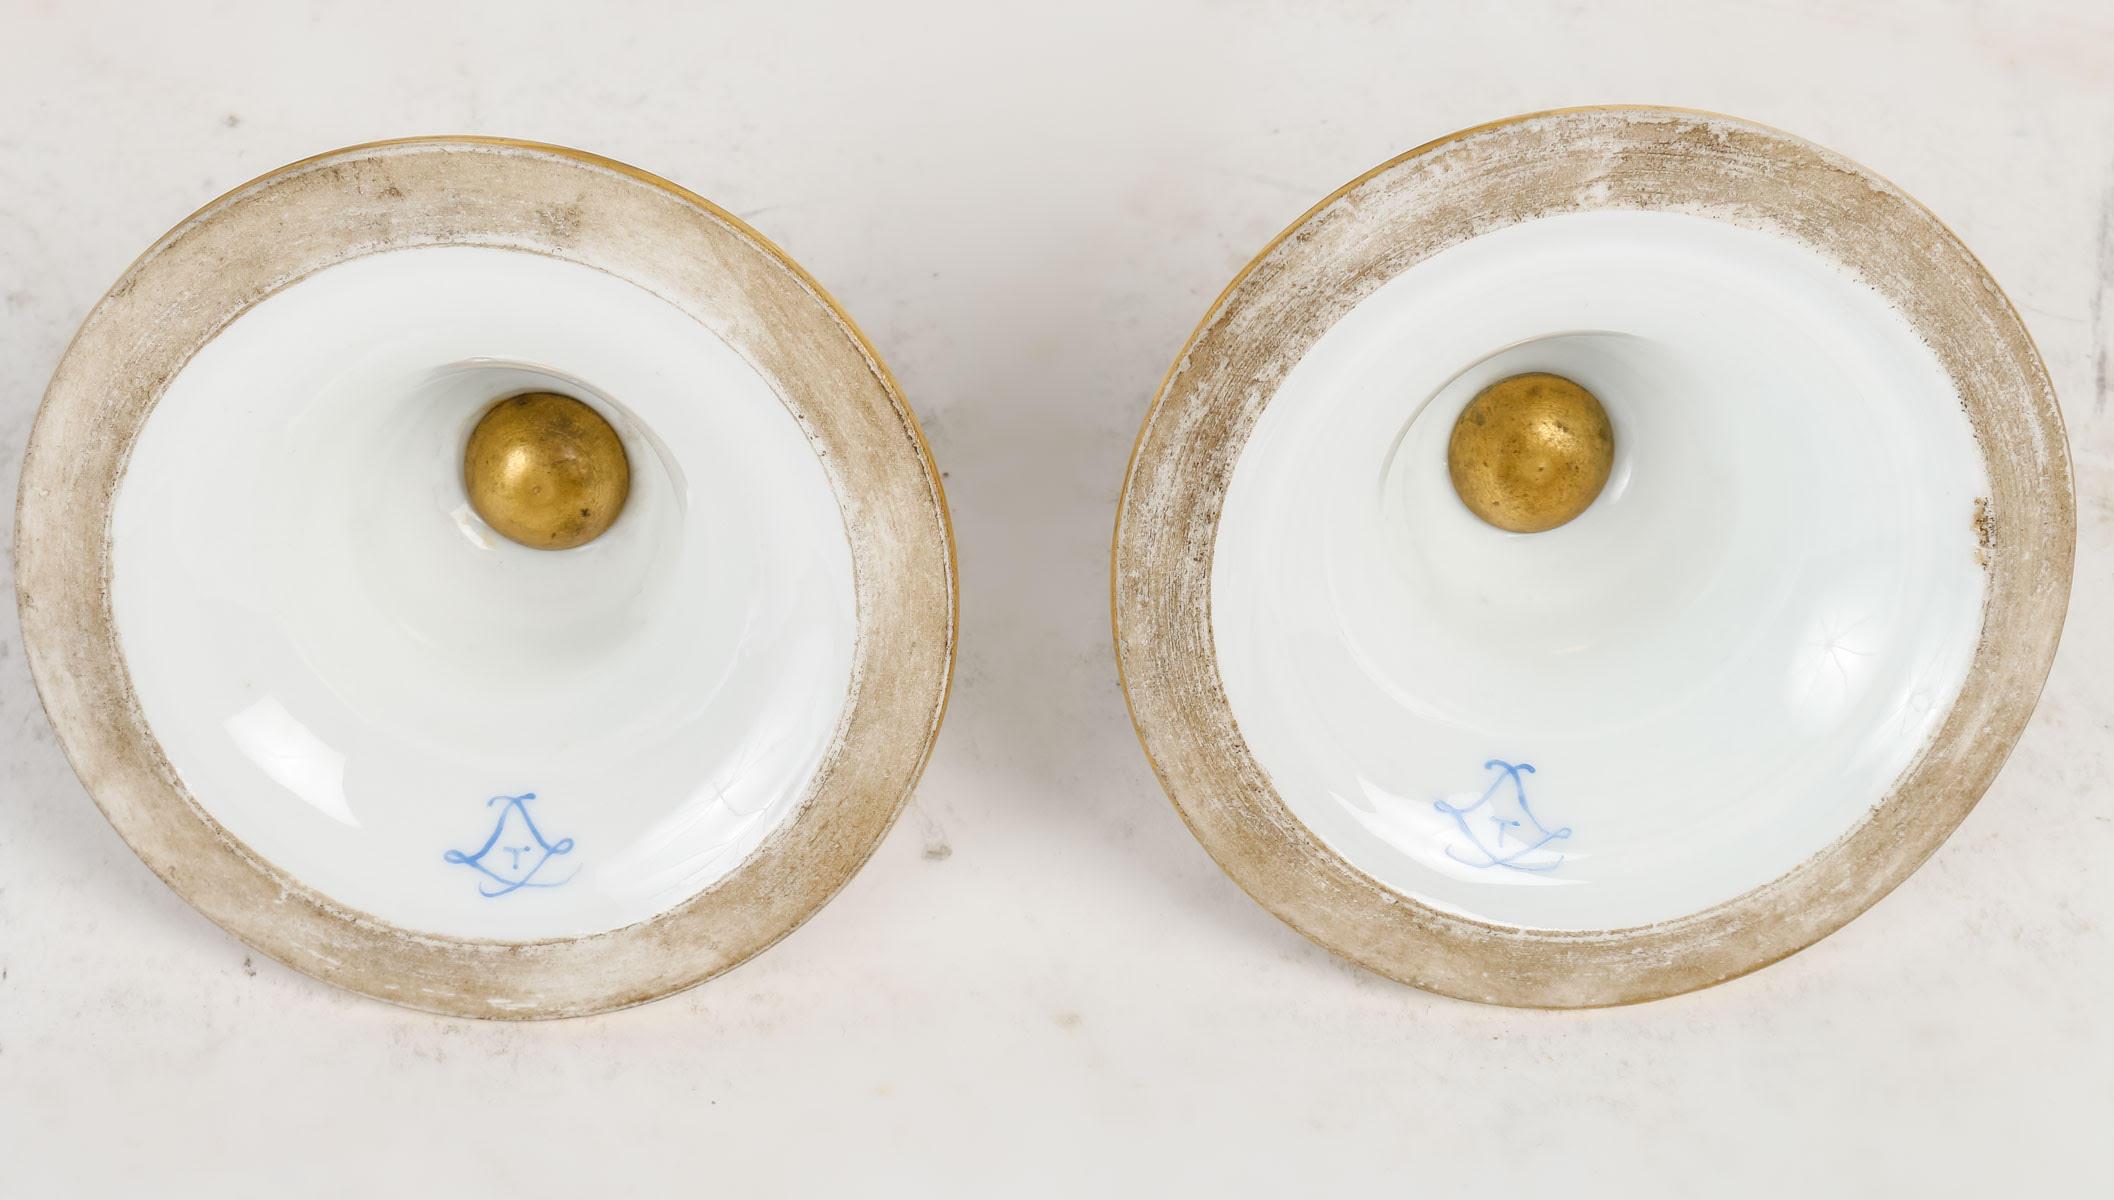 Bronze Pair of Perfume Burners from the Manufacture de Sèvres, Early 20th Century. For Sale